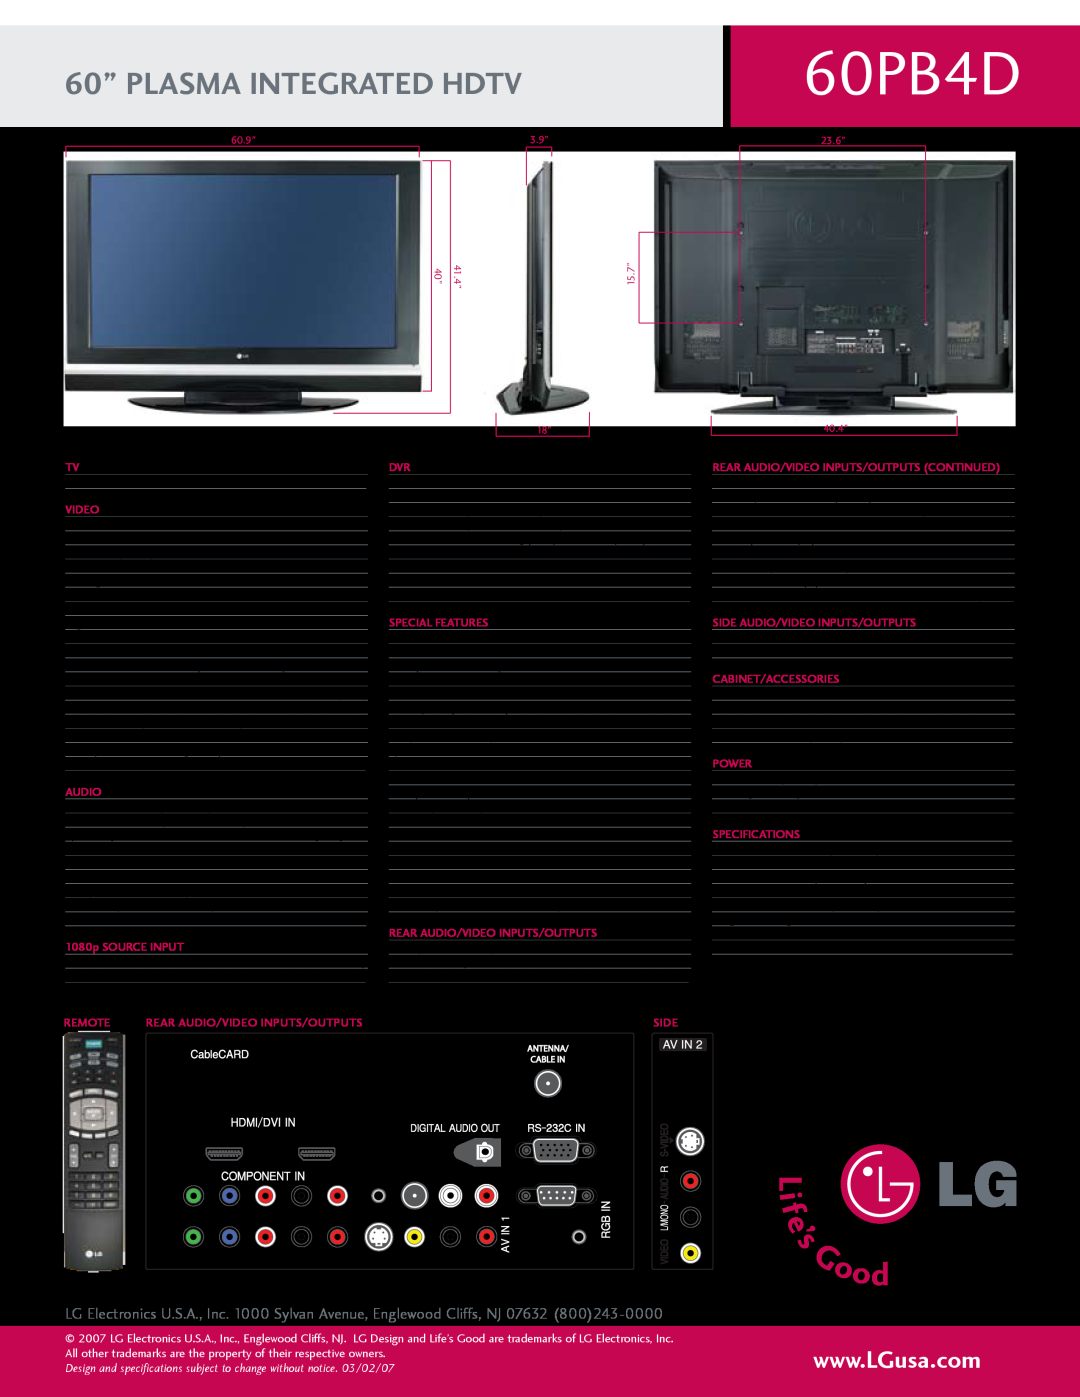 LG Electronics 60PB4D 60” PLASMA INTEGRATED HDTV, Design and specifications subject to change without notice. 03/02/07 